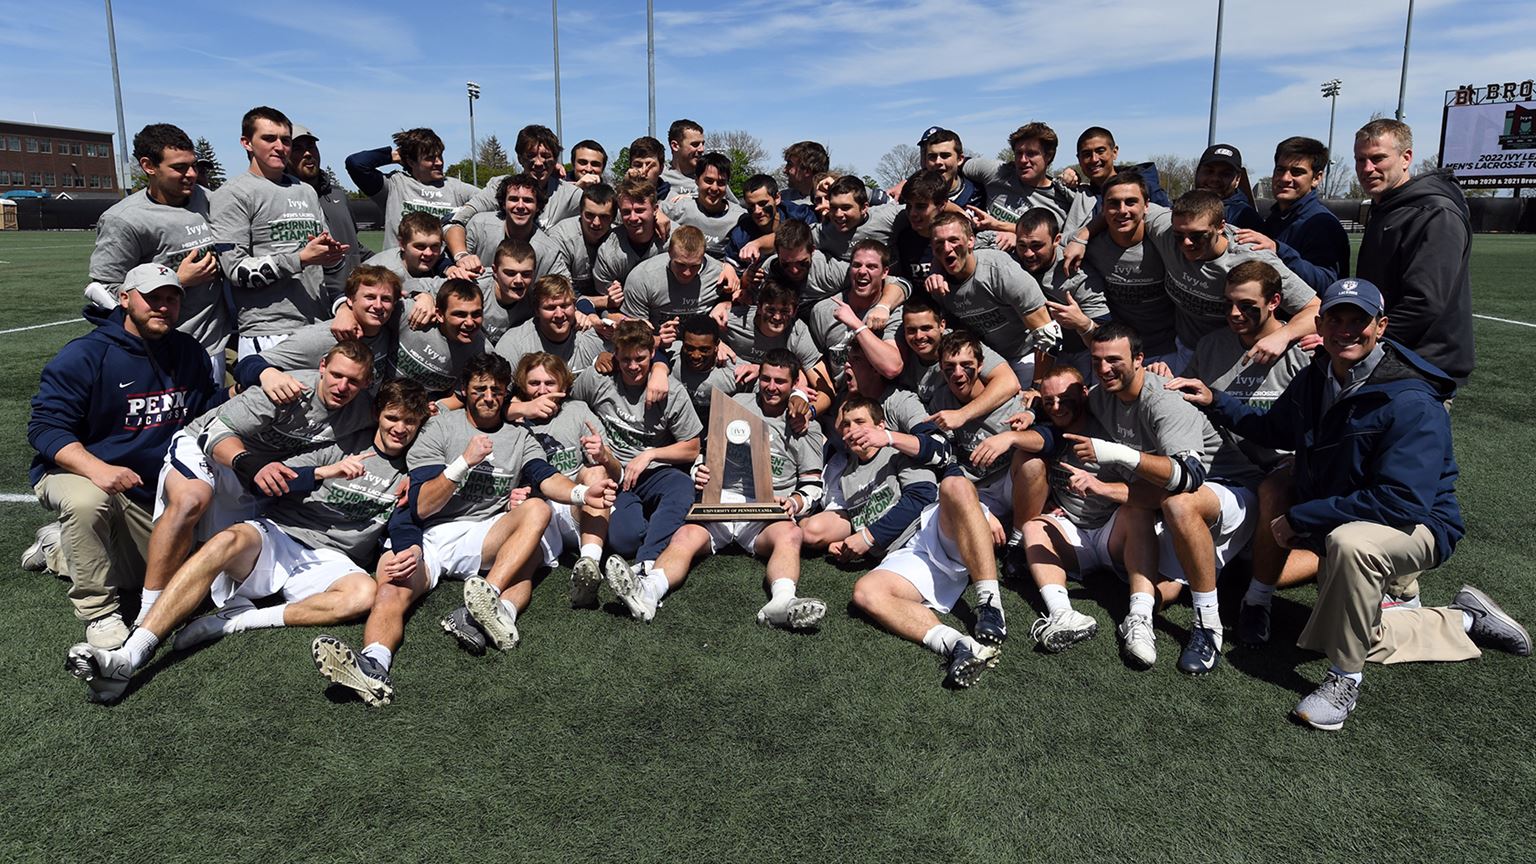 The men's lacrosse team celebrates with the championship trophy.